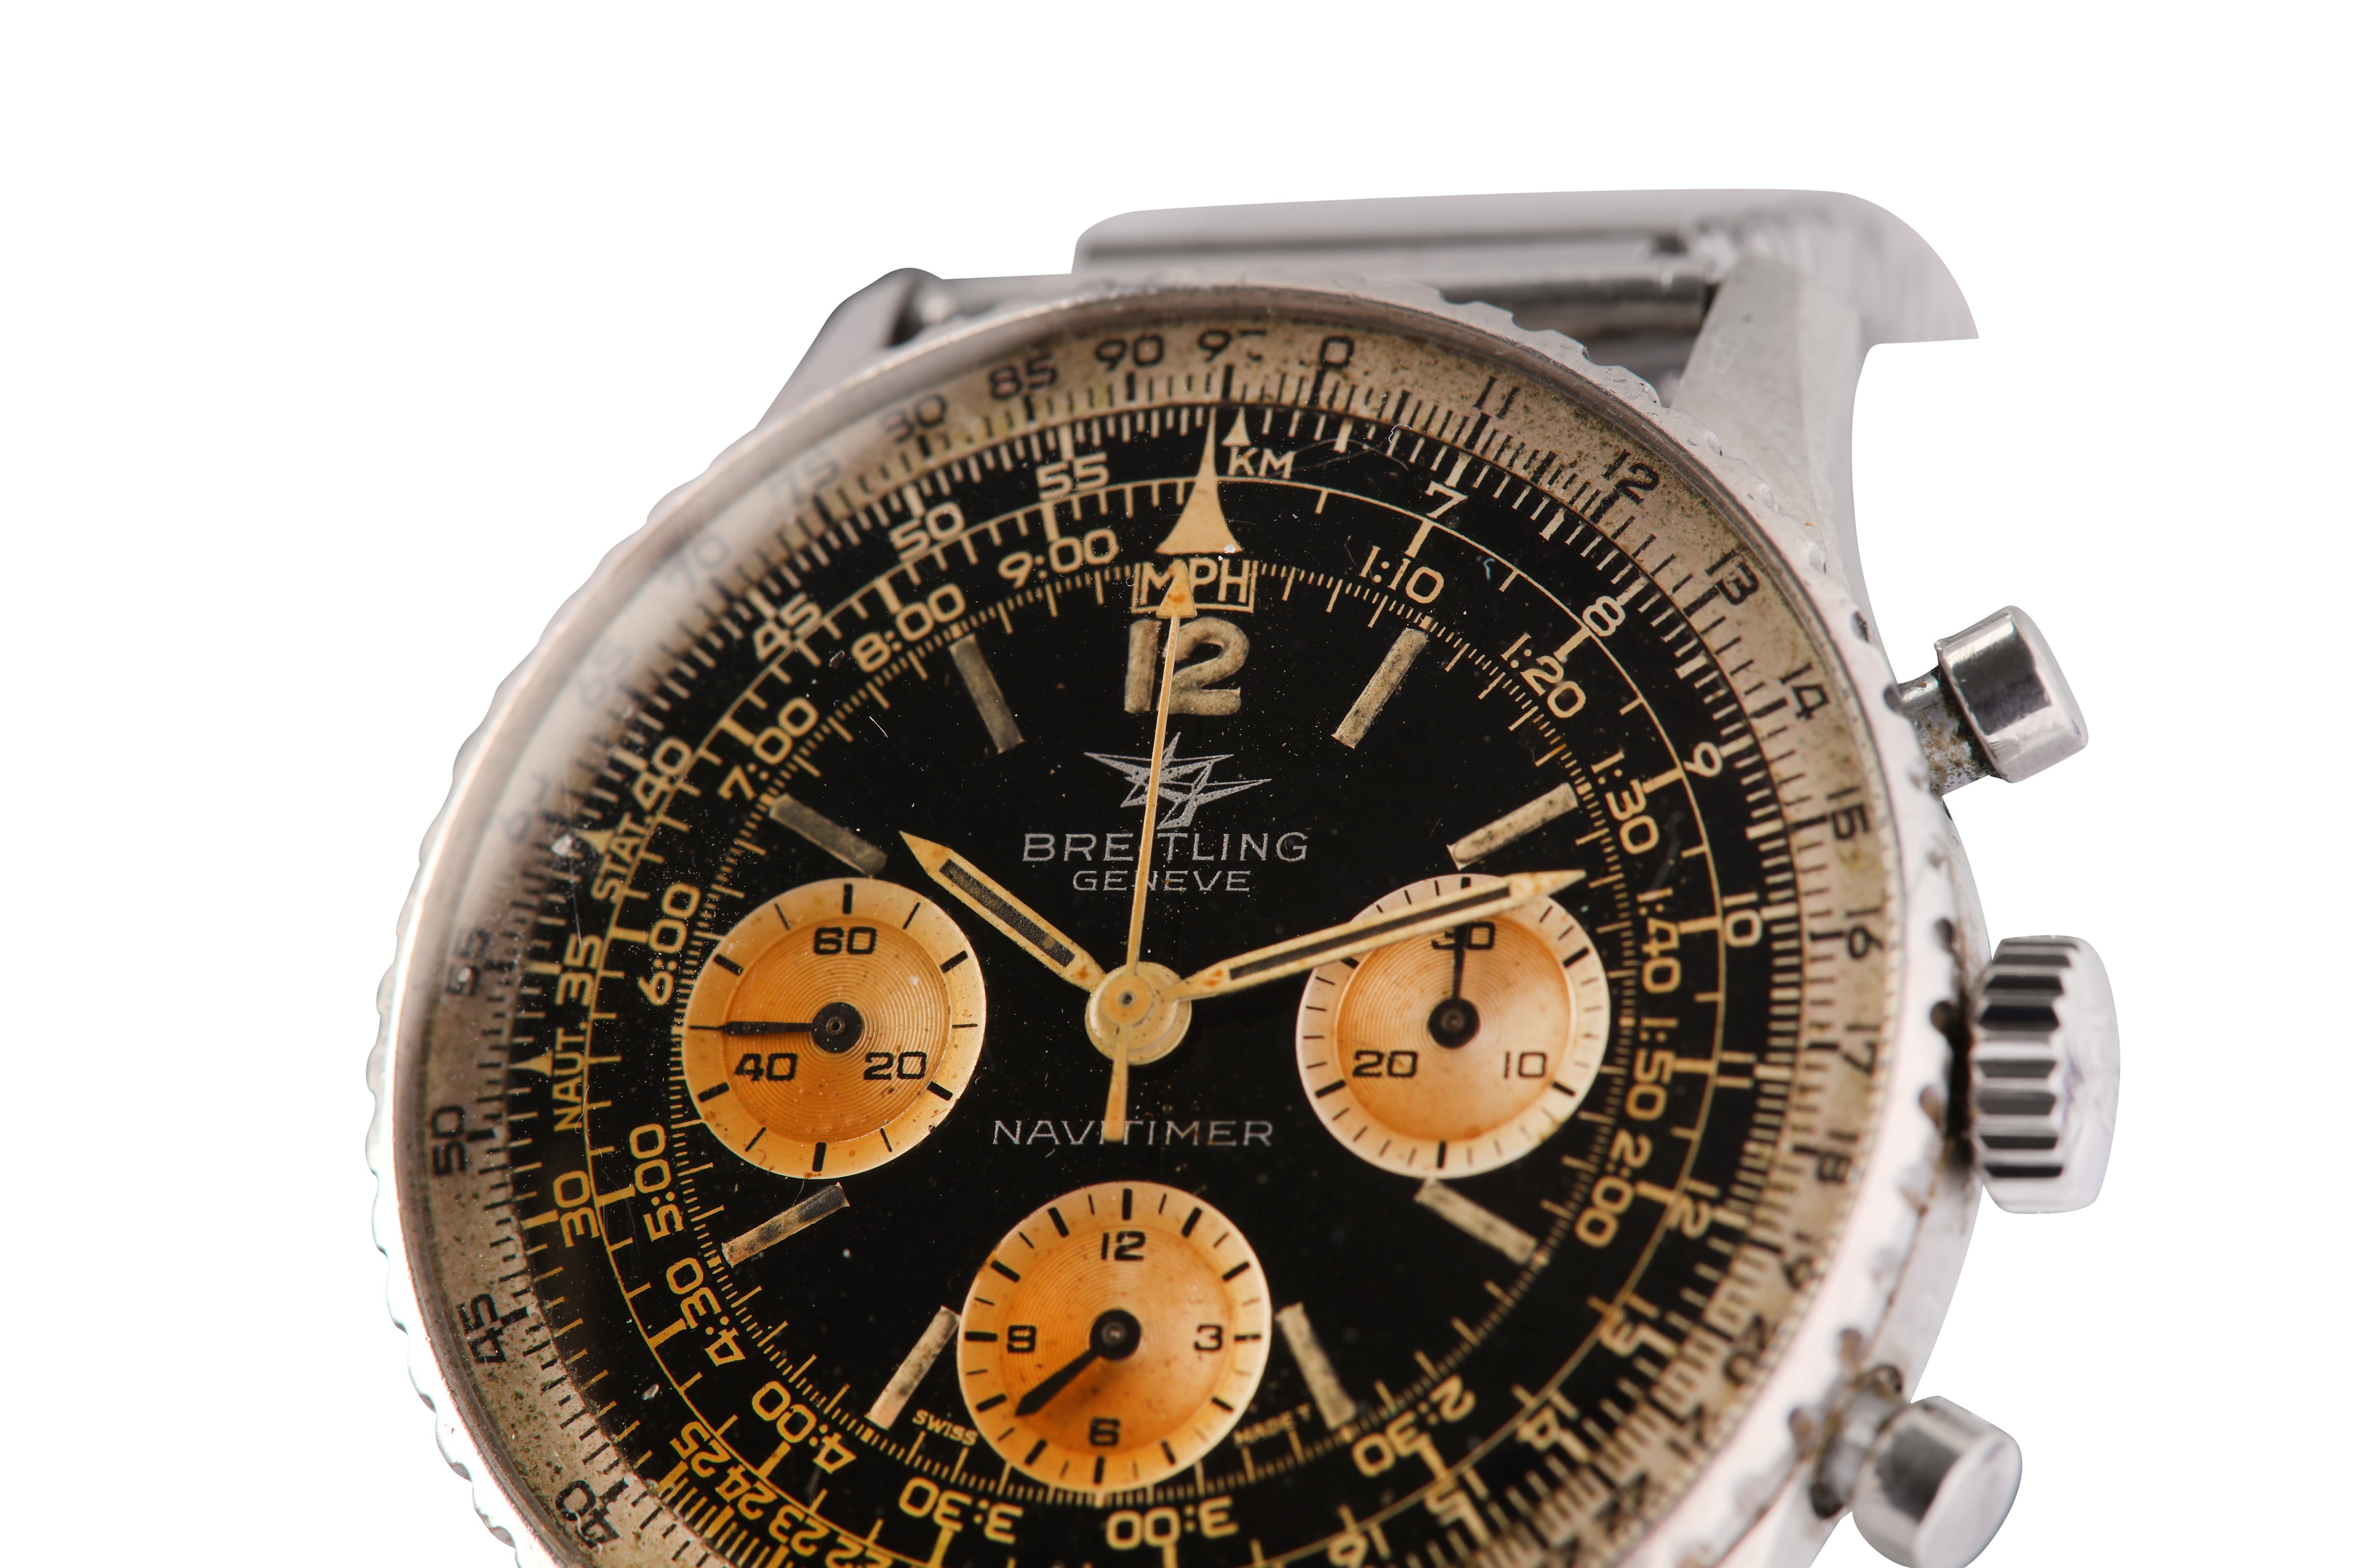 BREITLING. - Image 3 of 8